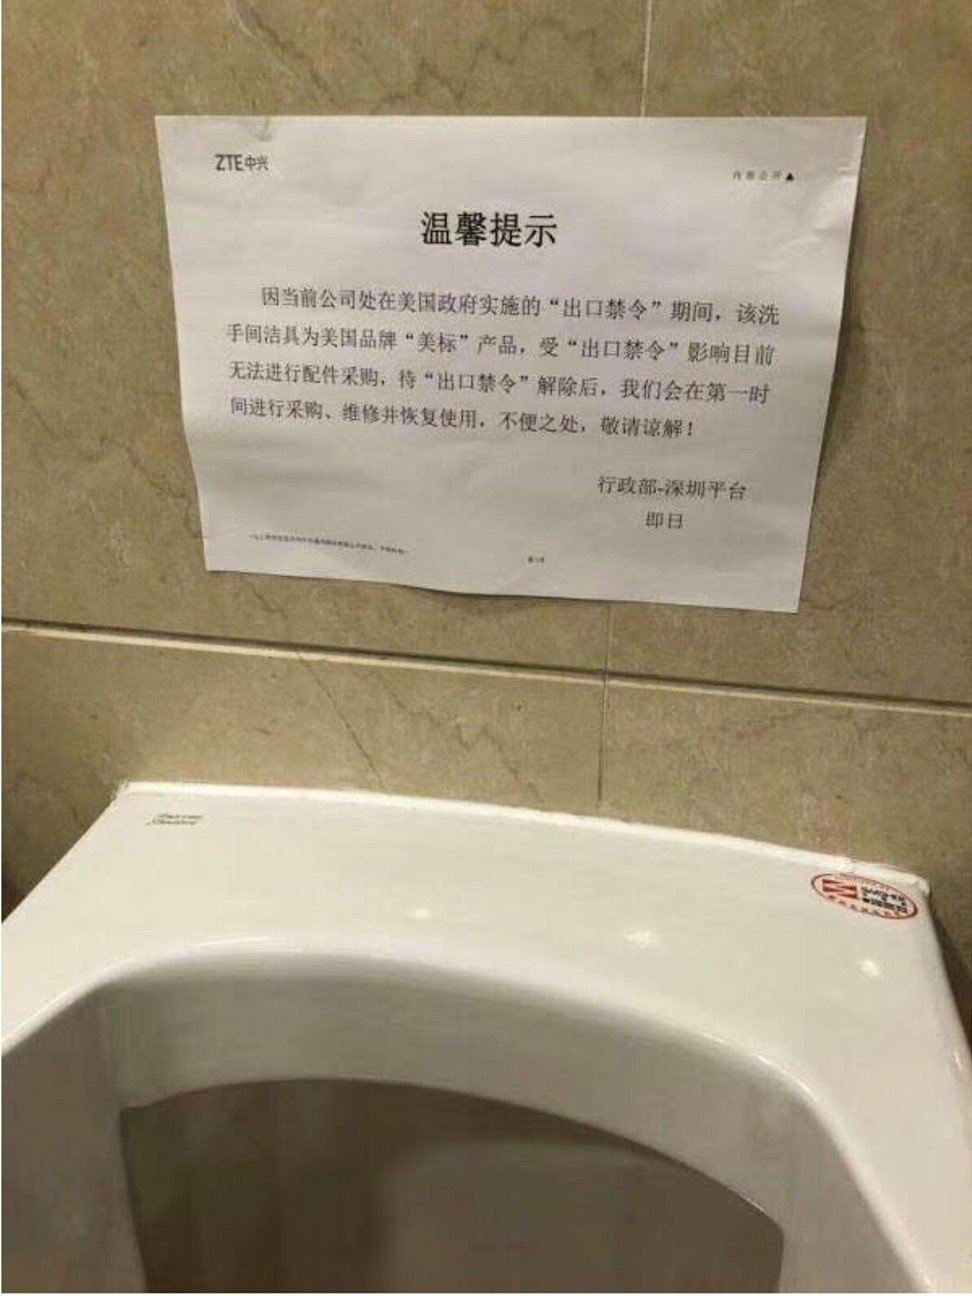 A note explaining that this broken American Standard urinal at a ZTE office building in Shenzhen, couldn’t be fixed due to the US export ban. Photo: Weibo